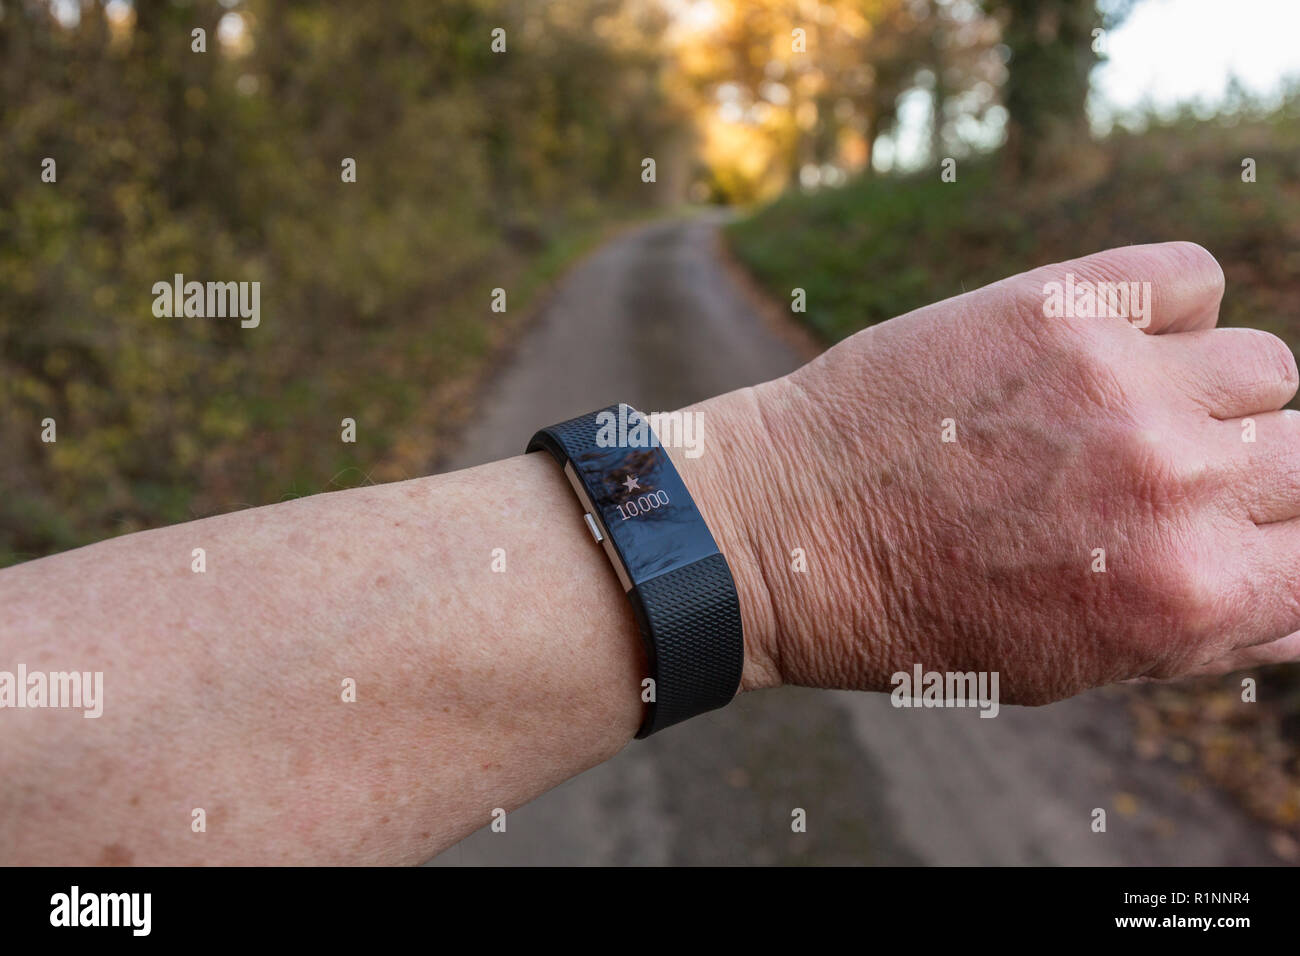 Stars to announce  10,000 steps on a Fitbit, fitness tracker, walking up a country lane. Stock Photo